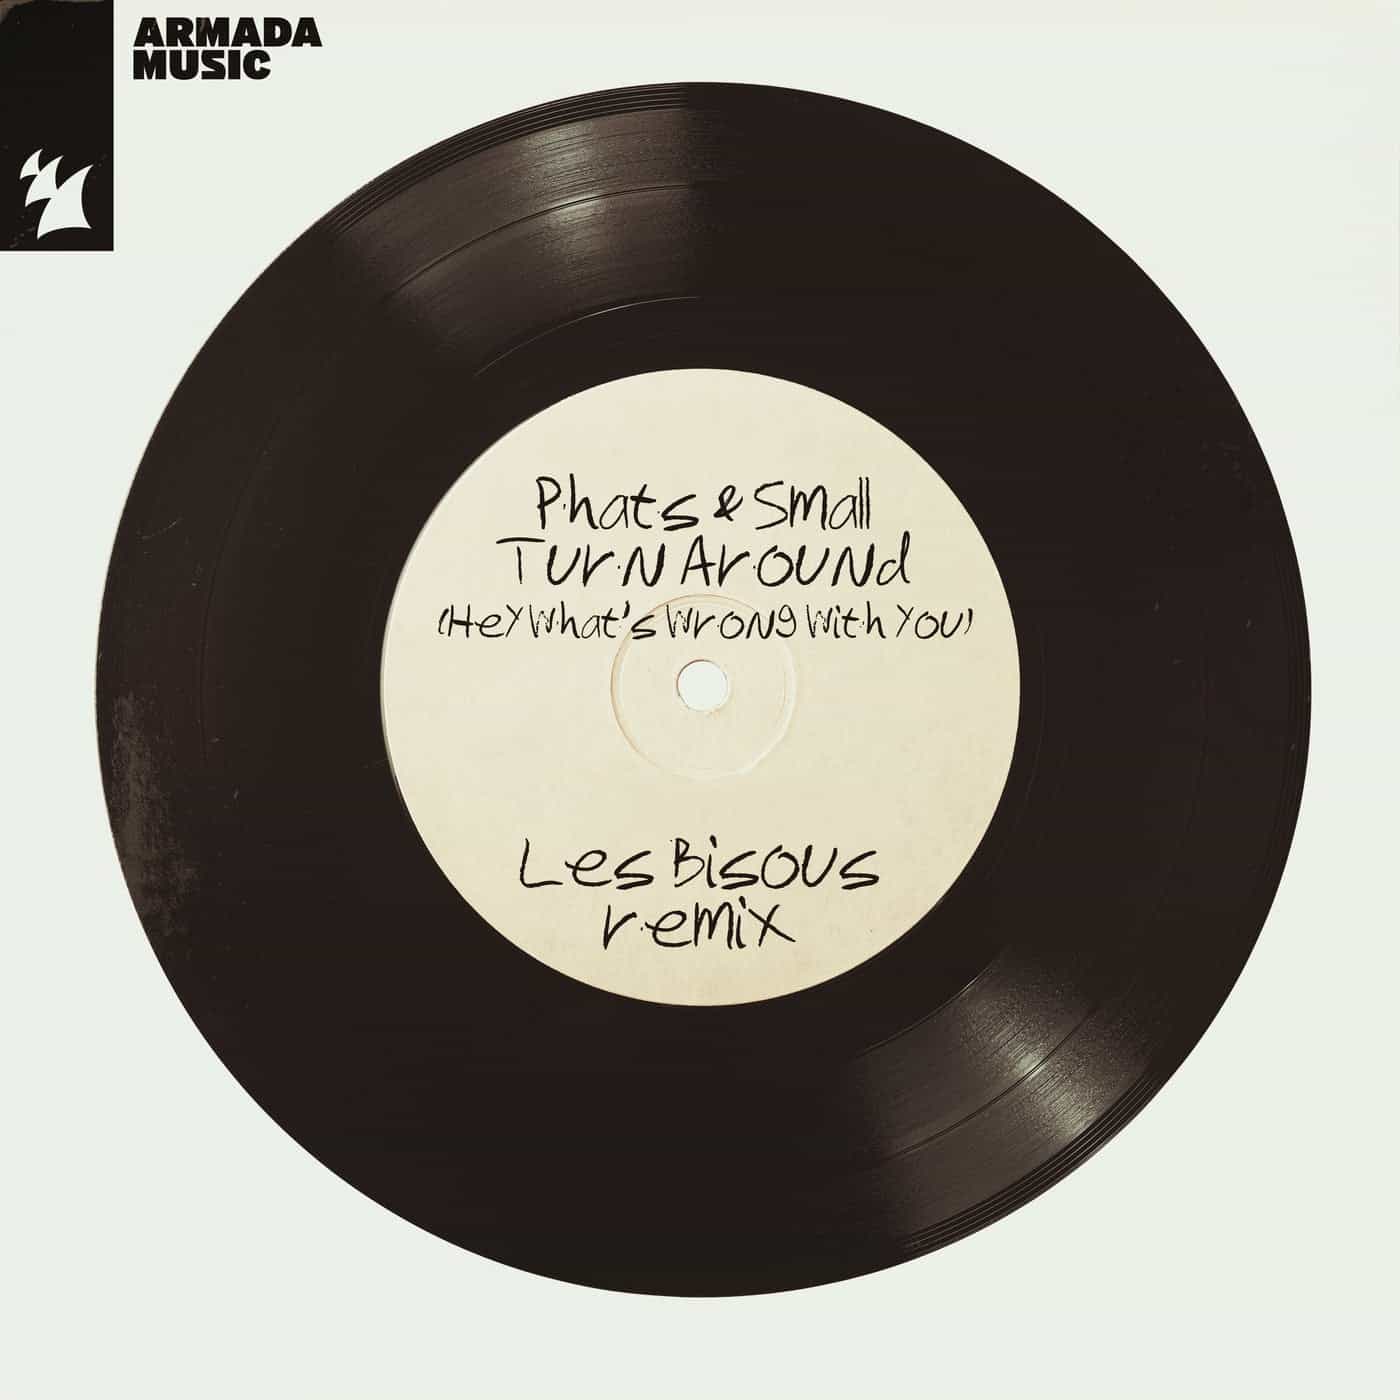 image cover: Phats & Small - Turn Around (Hey What's Wrong With You) - Les Bisous Remix / ARMAS2322